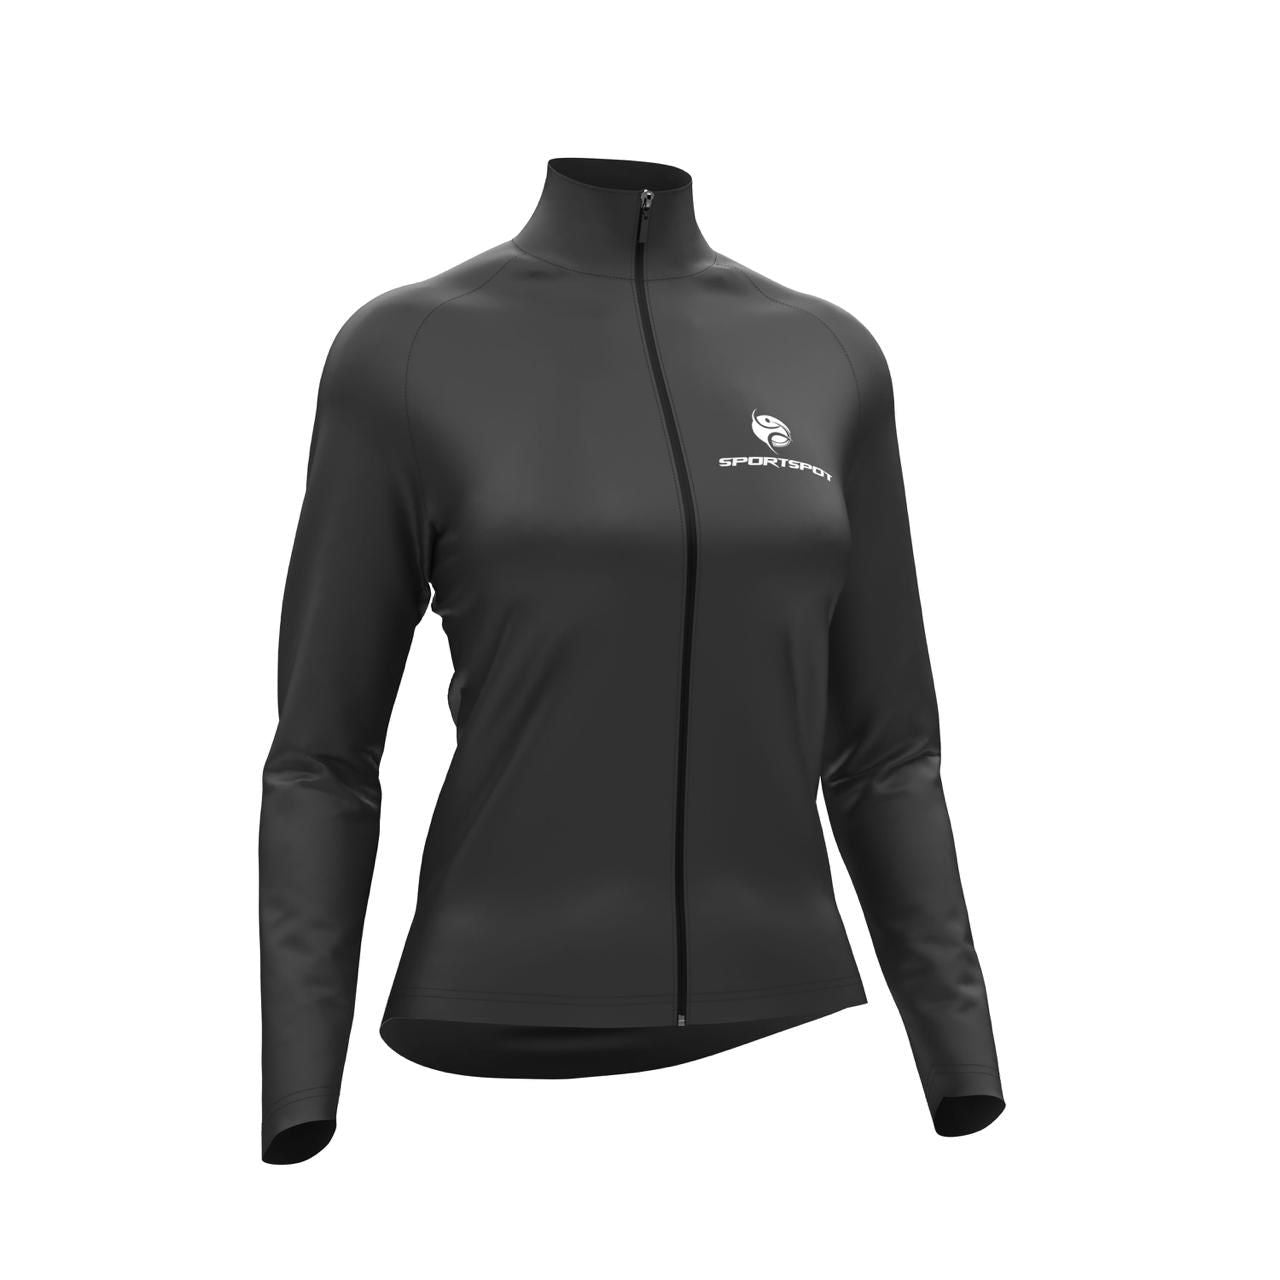 Kallie High Visibility Cycling Jacket for Women - Night Reflective